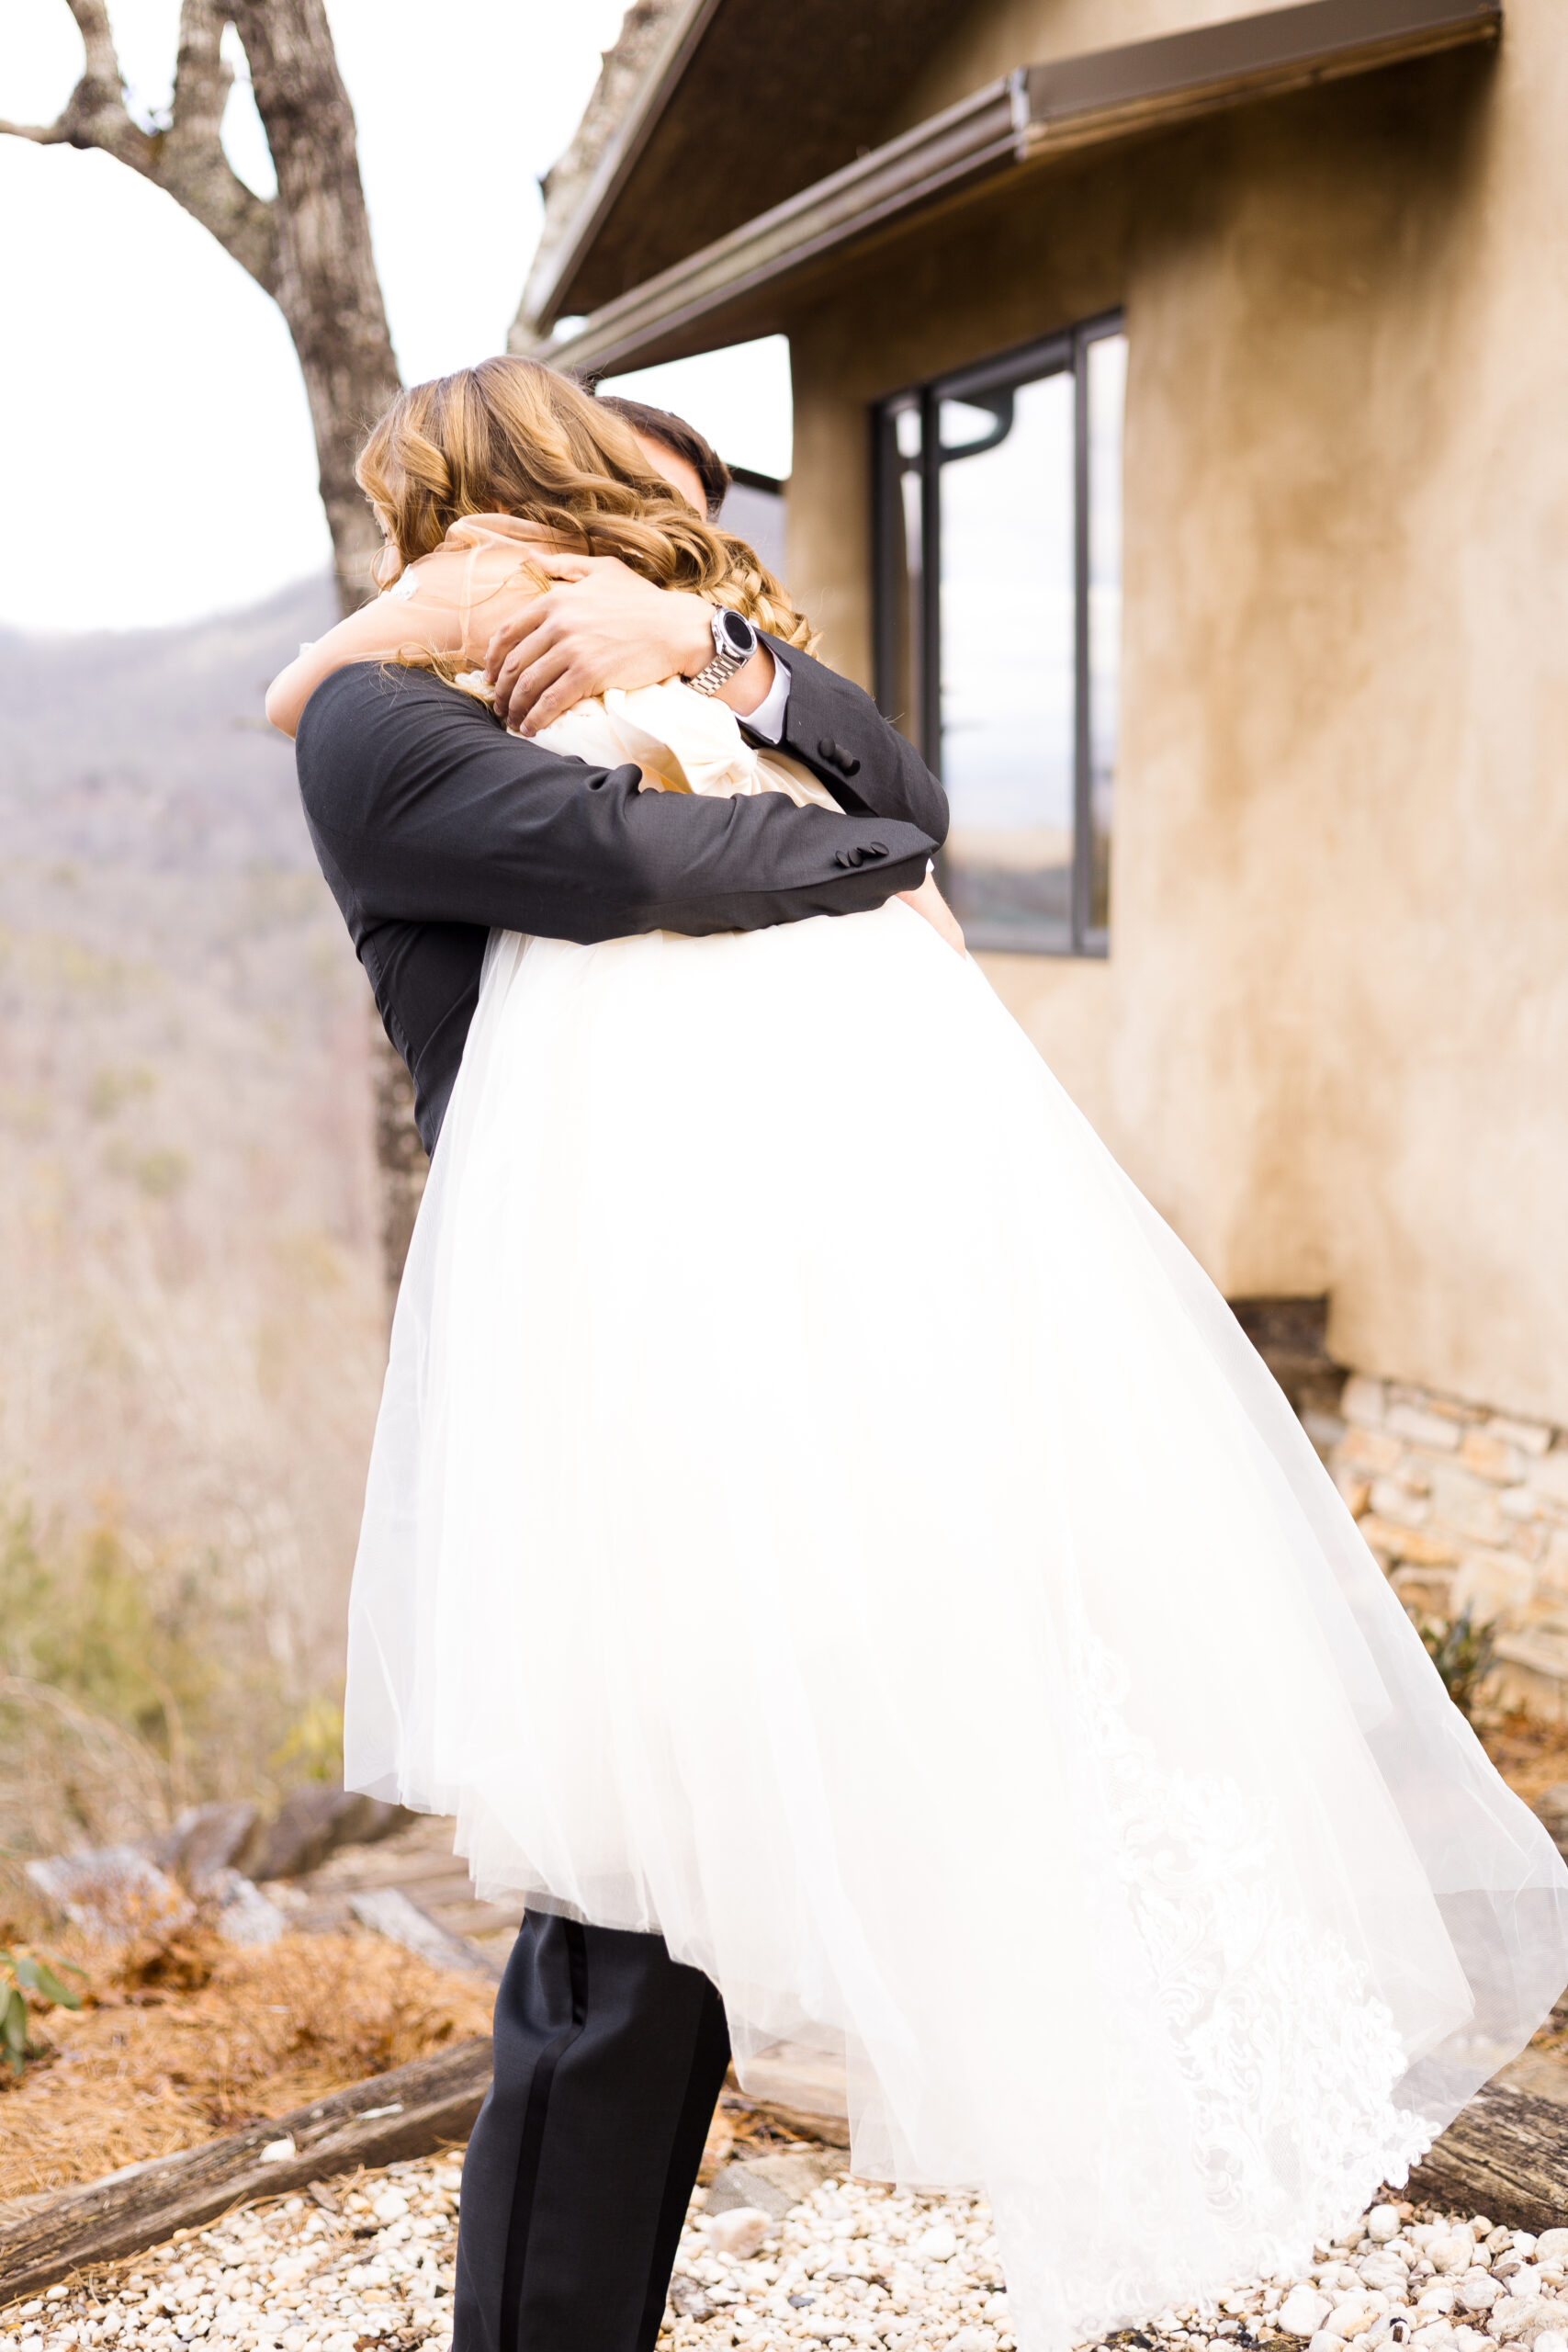 cute elopement photos with kids
